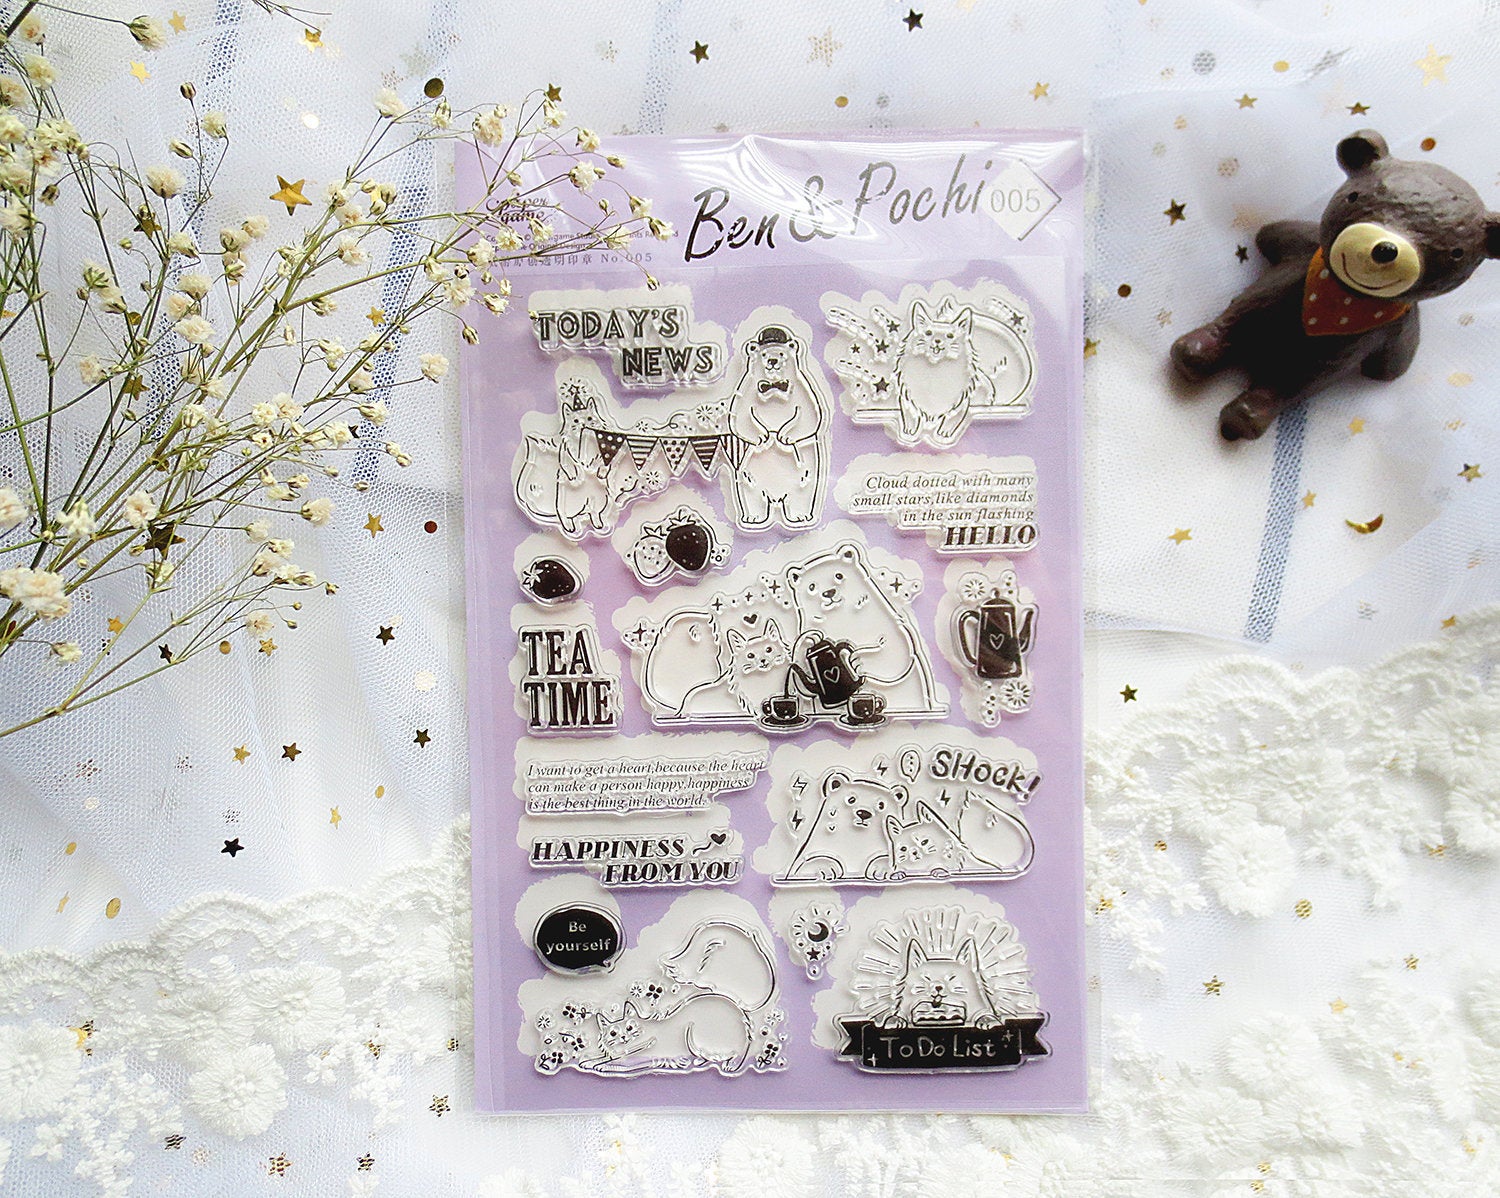 Ben and Pochi Acrylic Stamp Set – Papergame